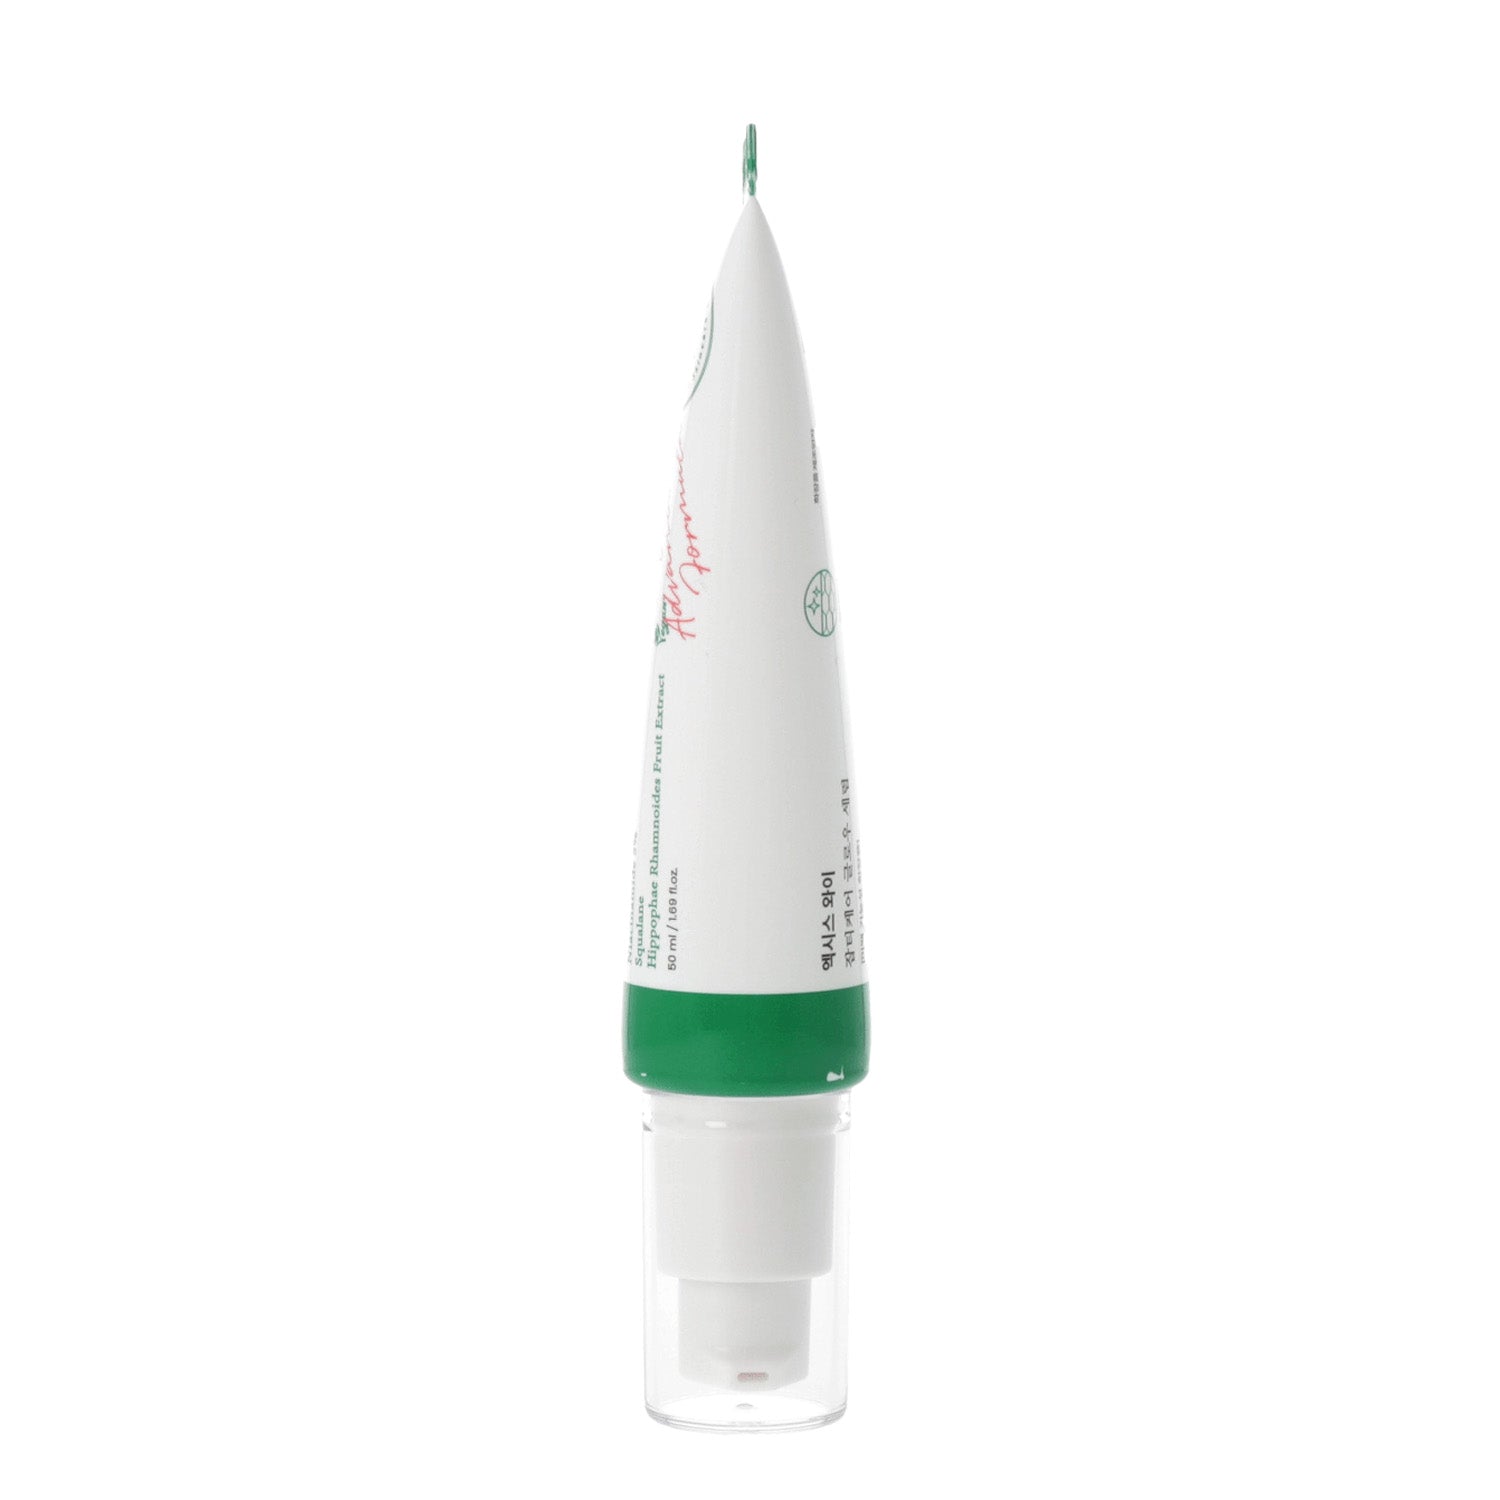 AXIS-Y Dark Spot Correcting Glow Serum 50ml with a tube of green and white toothpaste.